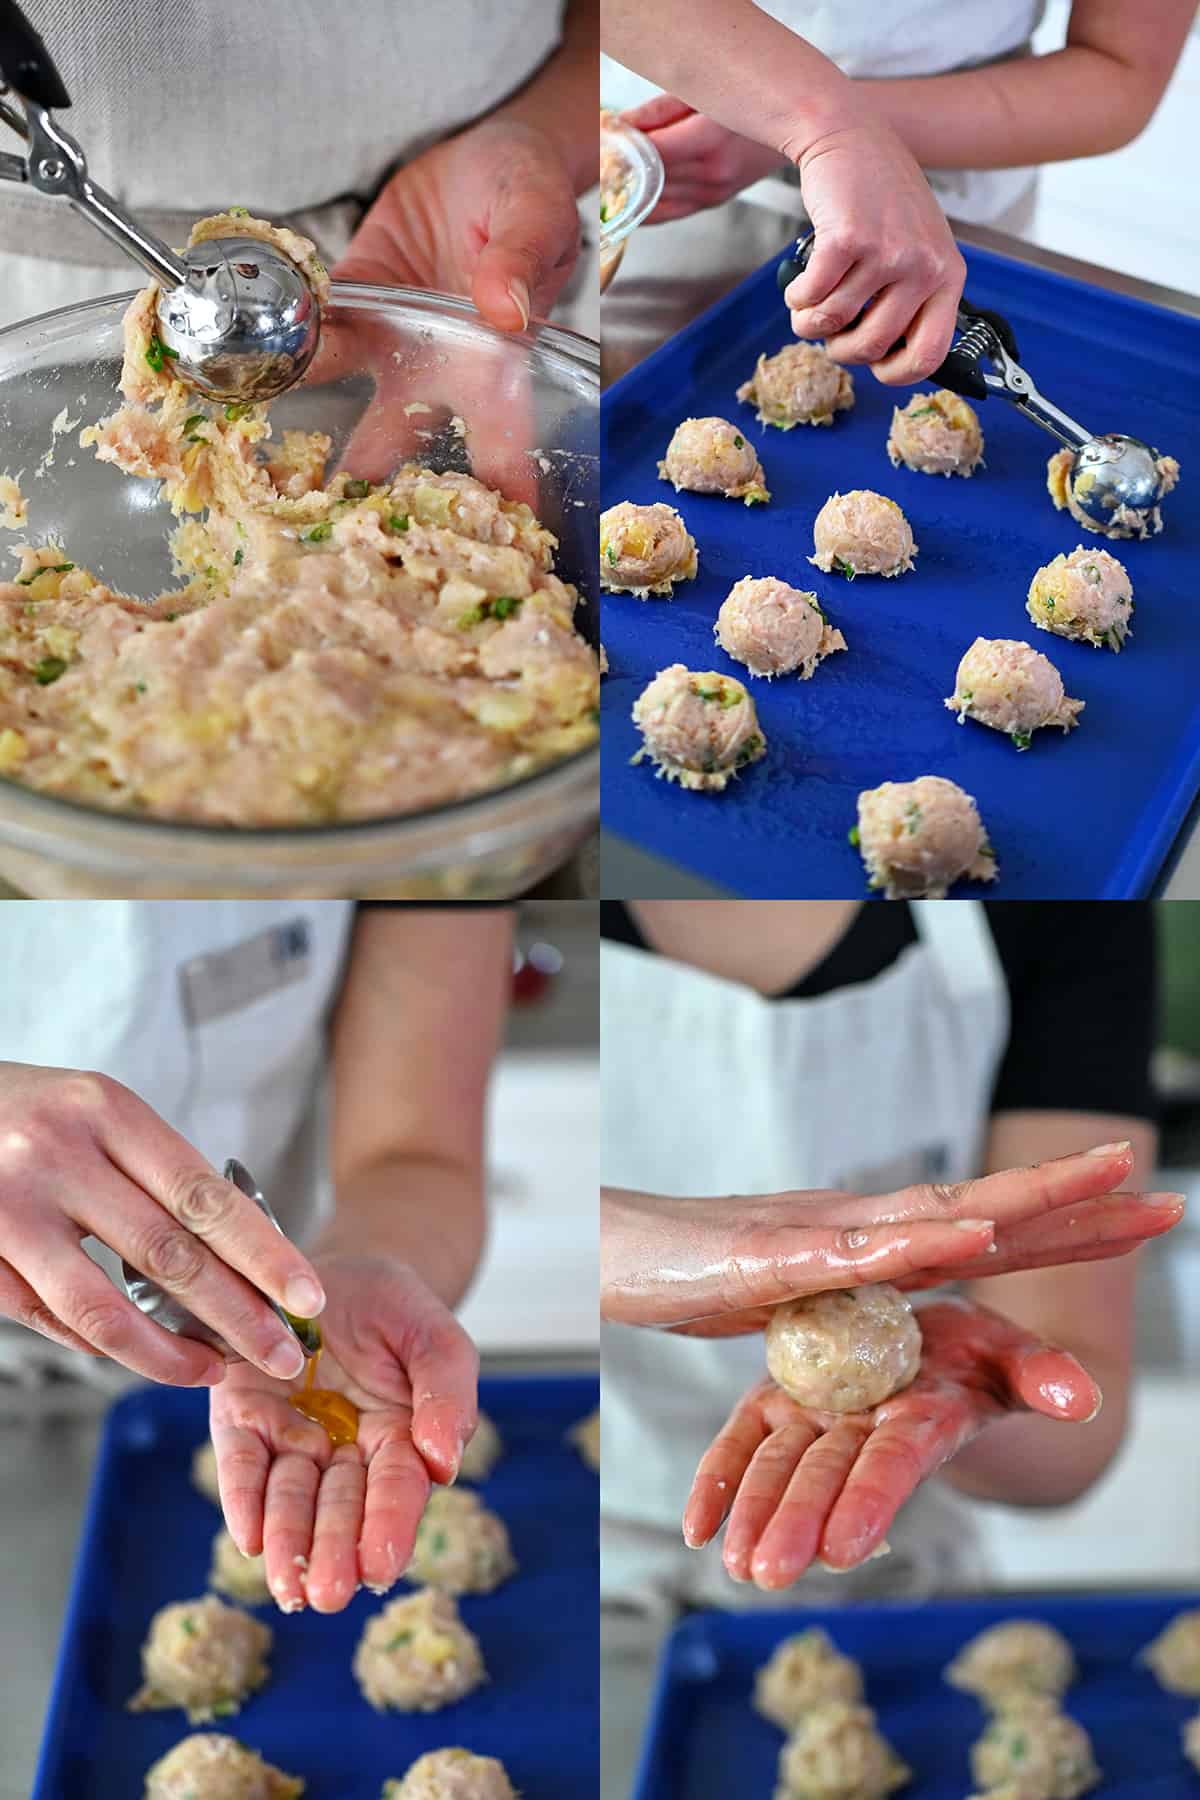 Four sequential shots that show someone forming 1-inch wide teriyaki pineapple meatballs.